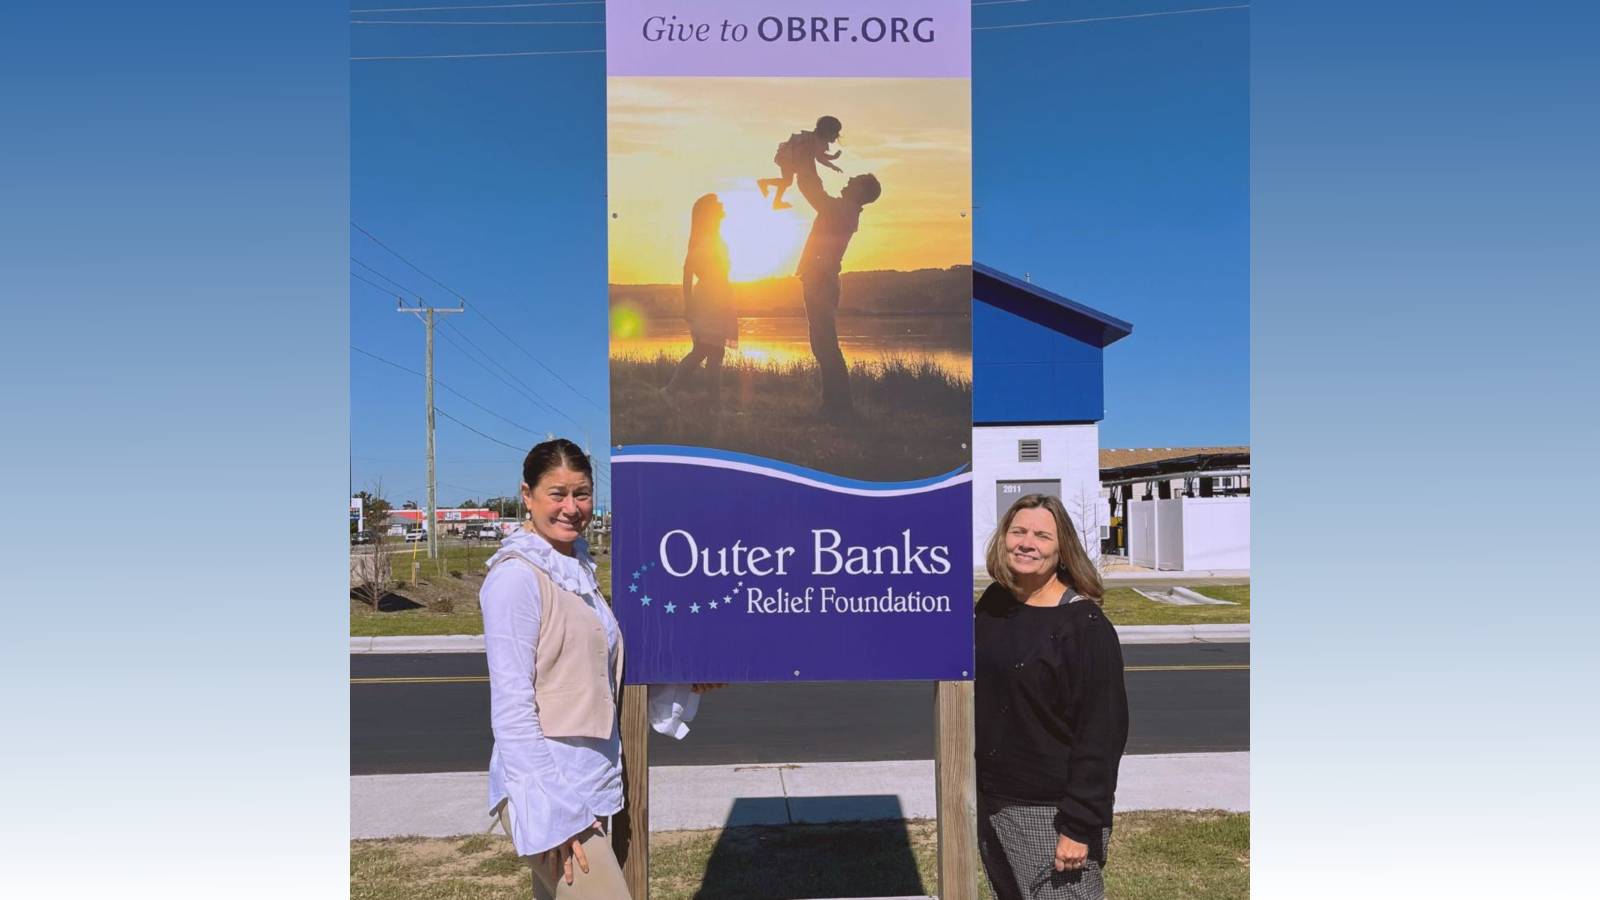 Outer Banks Relief Foundation named Albemarle Area United Way certified partner agency